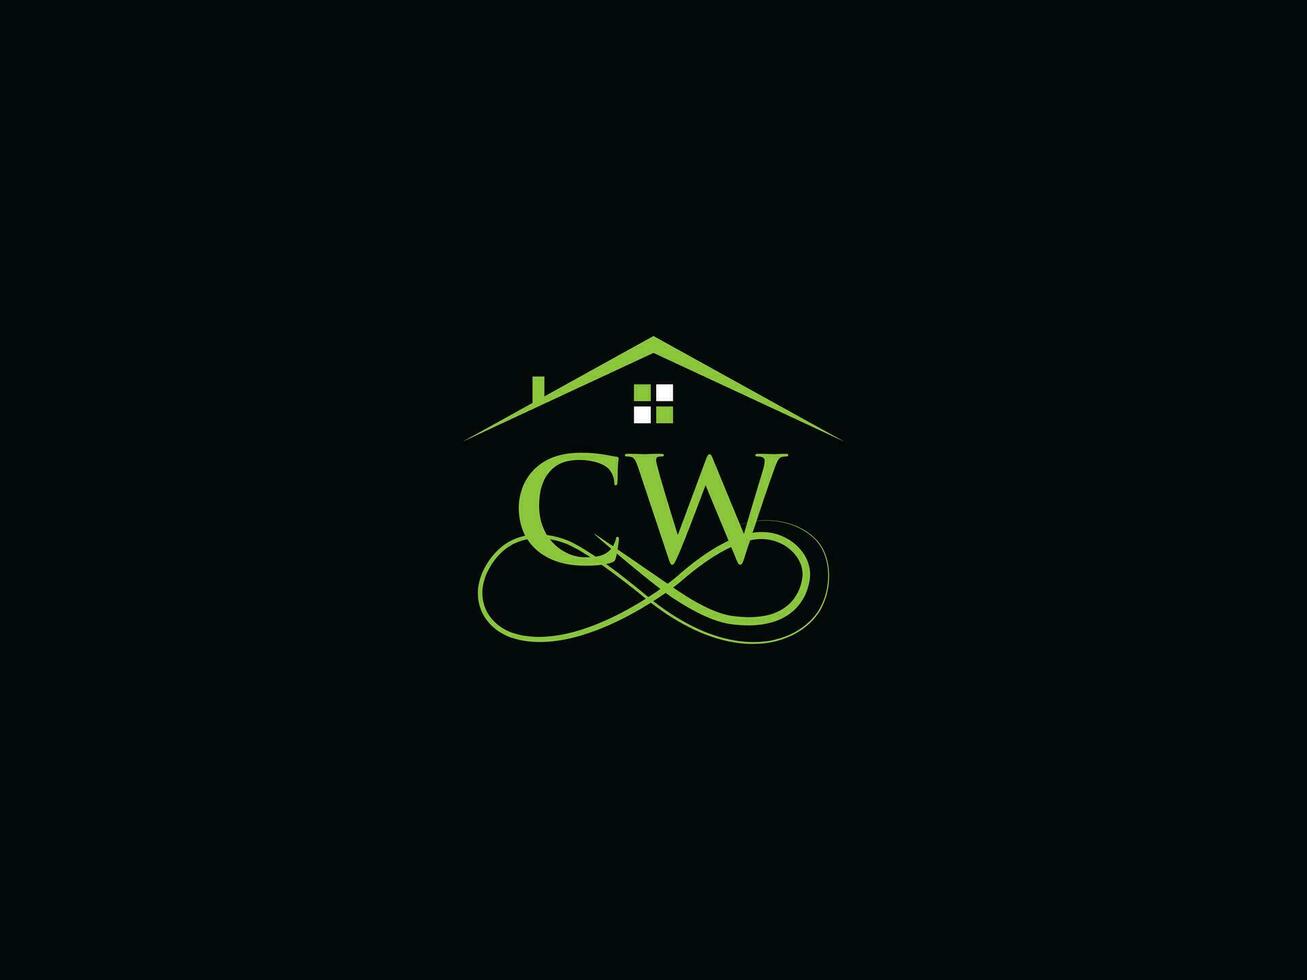 Real Estate Cw Logo Vector, Luxury CW Building  Logo For Business vector